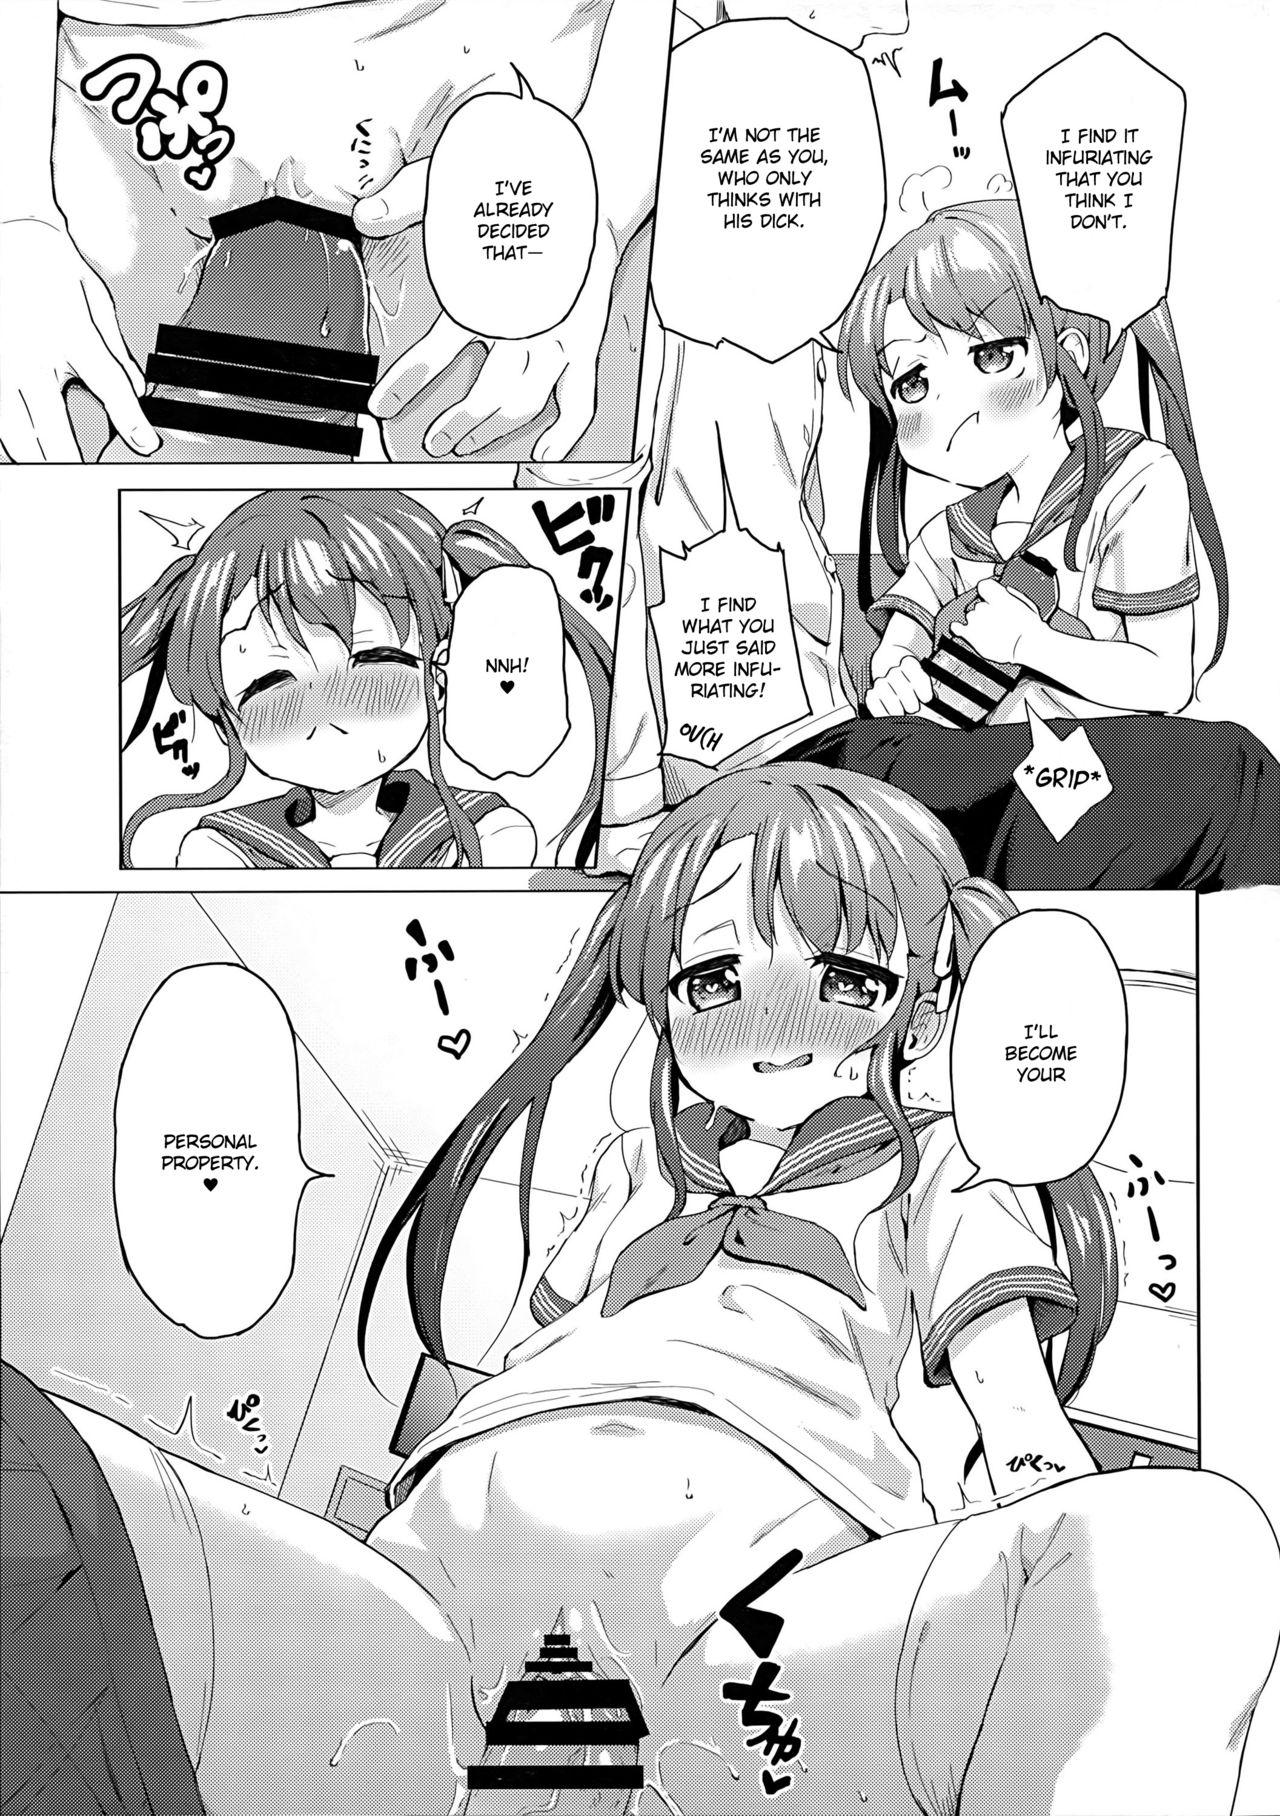 Big Cock Imouto wa Ani Senyou | A Little Sister Is Exclusive Only for Her Big Brother - Original Bitch - Page 8